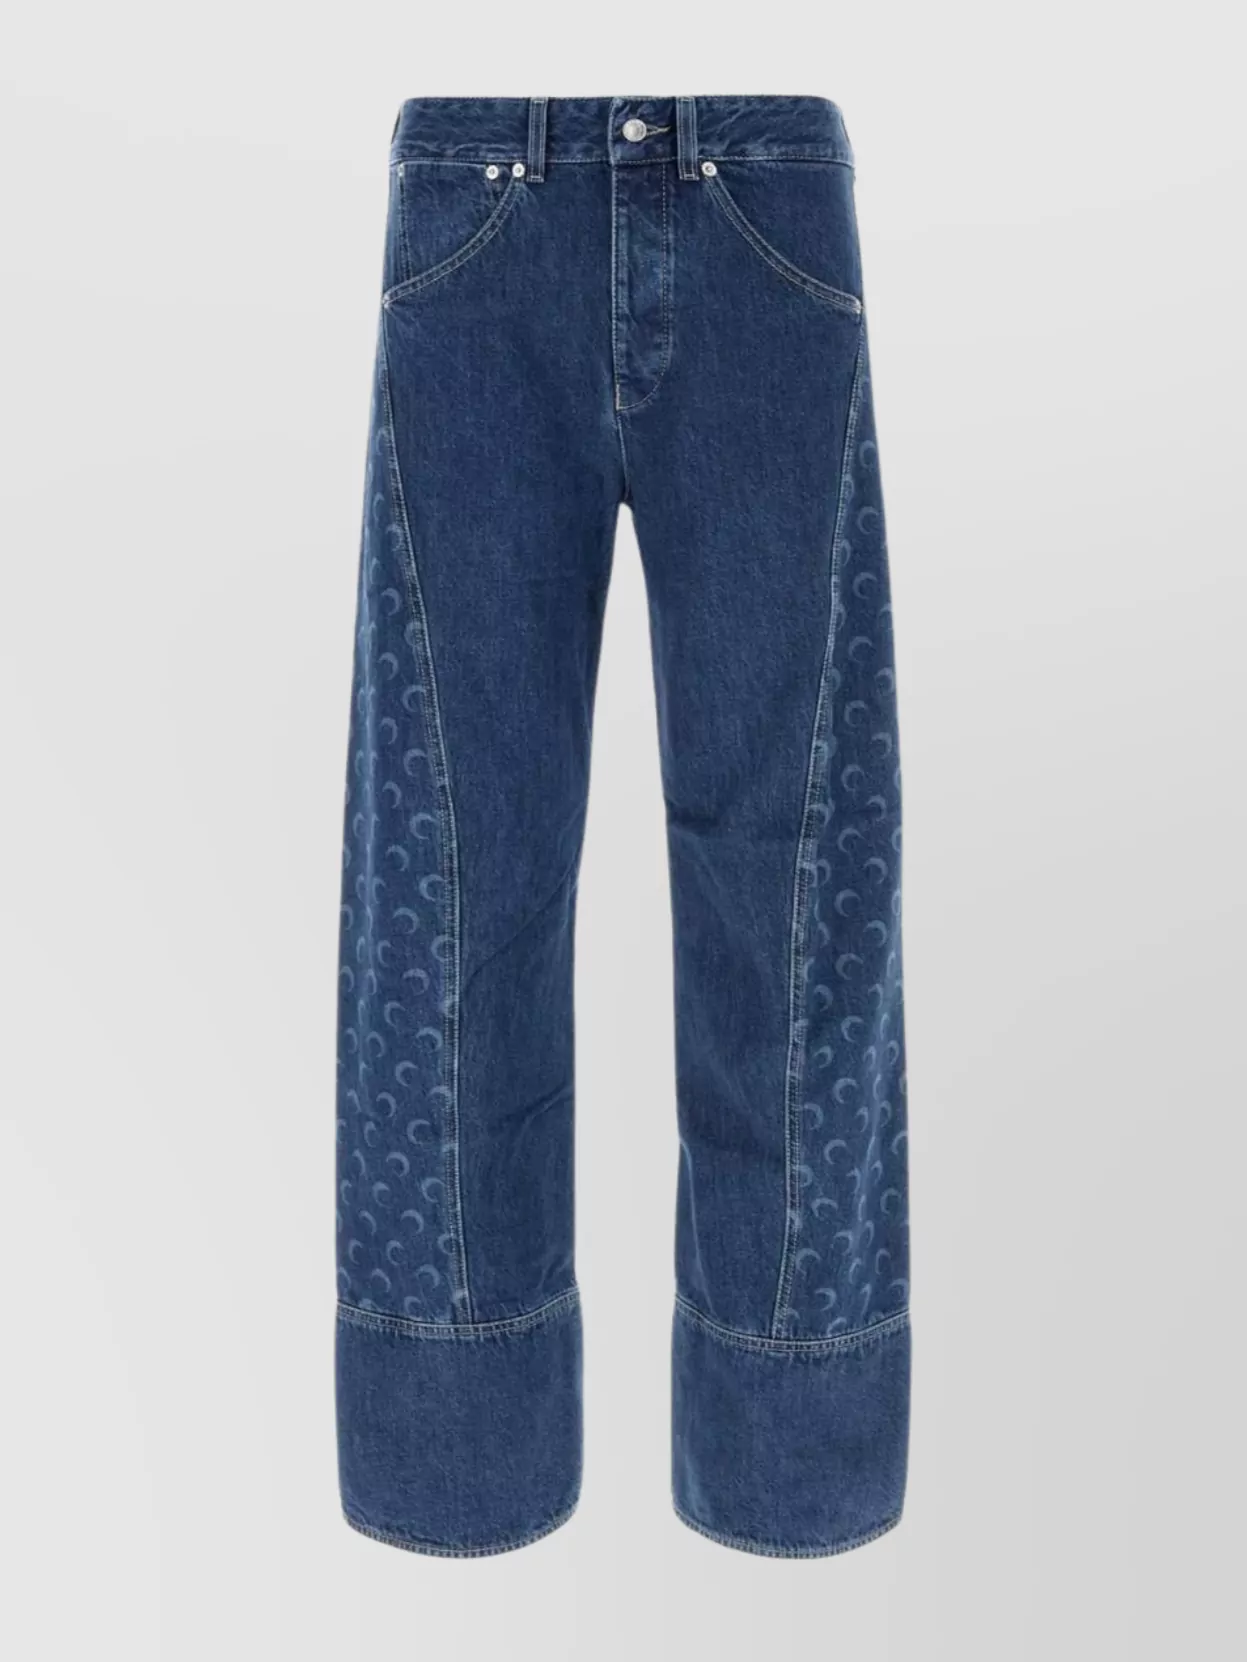 Shop Marine Serre Denim Jeans With Embroidered Pattern And Wide Leg